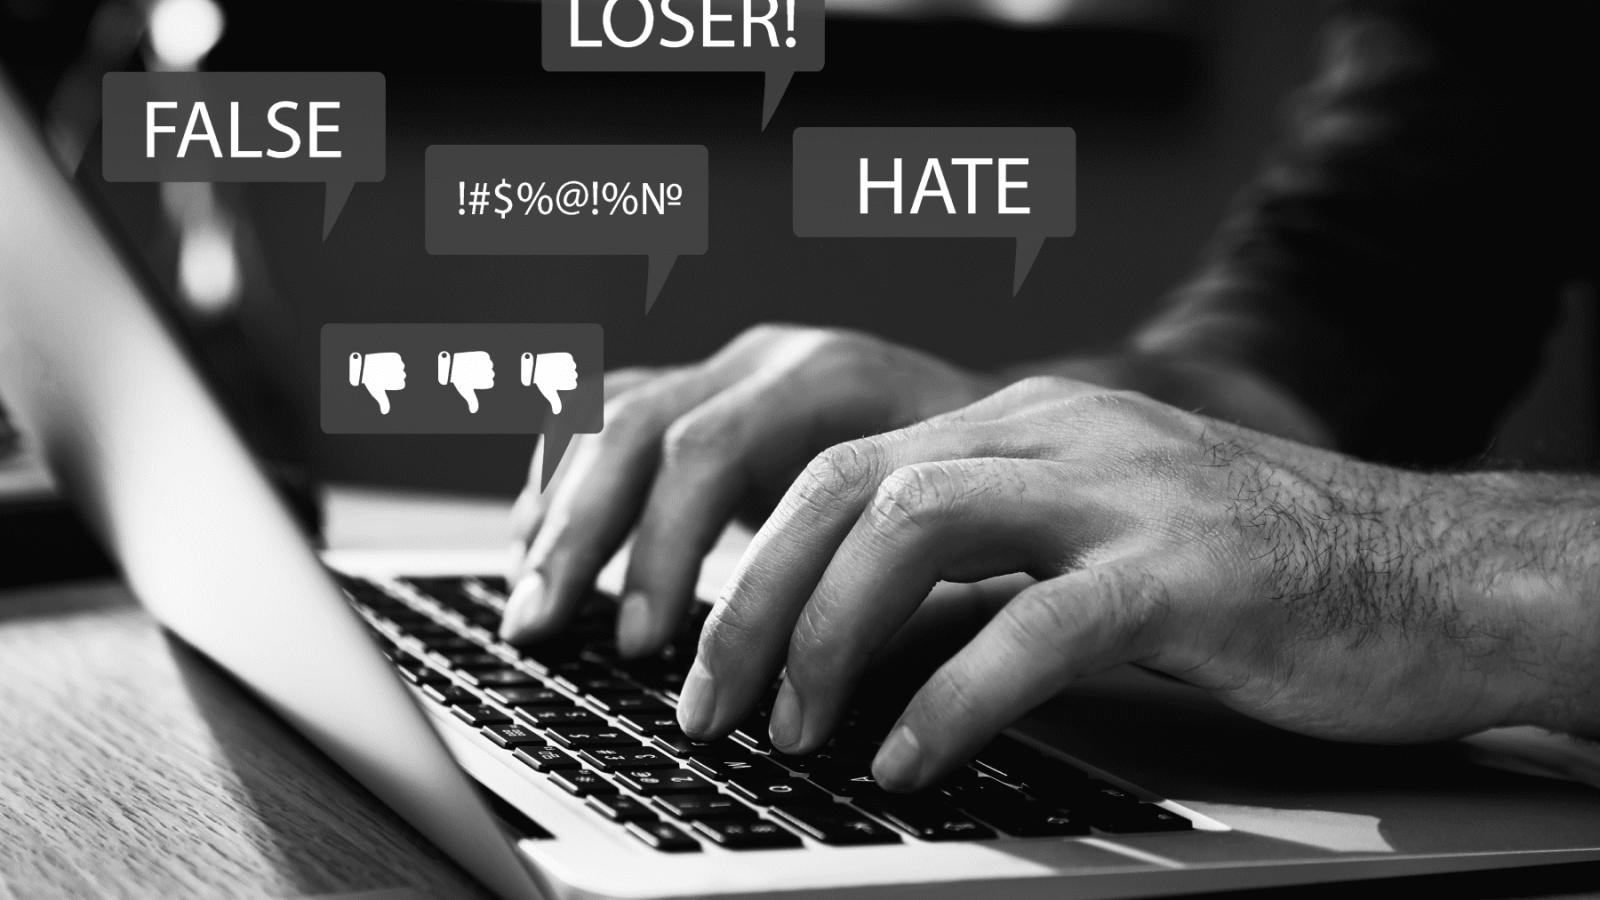 What Challenger Brands Can Do About Online Hate Speech